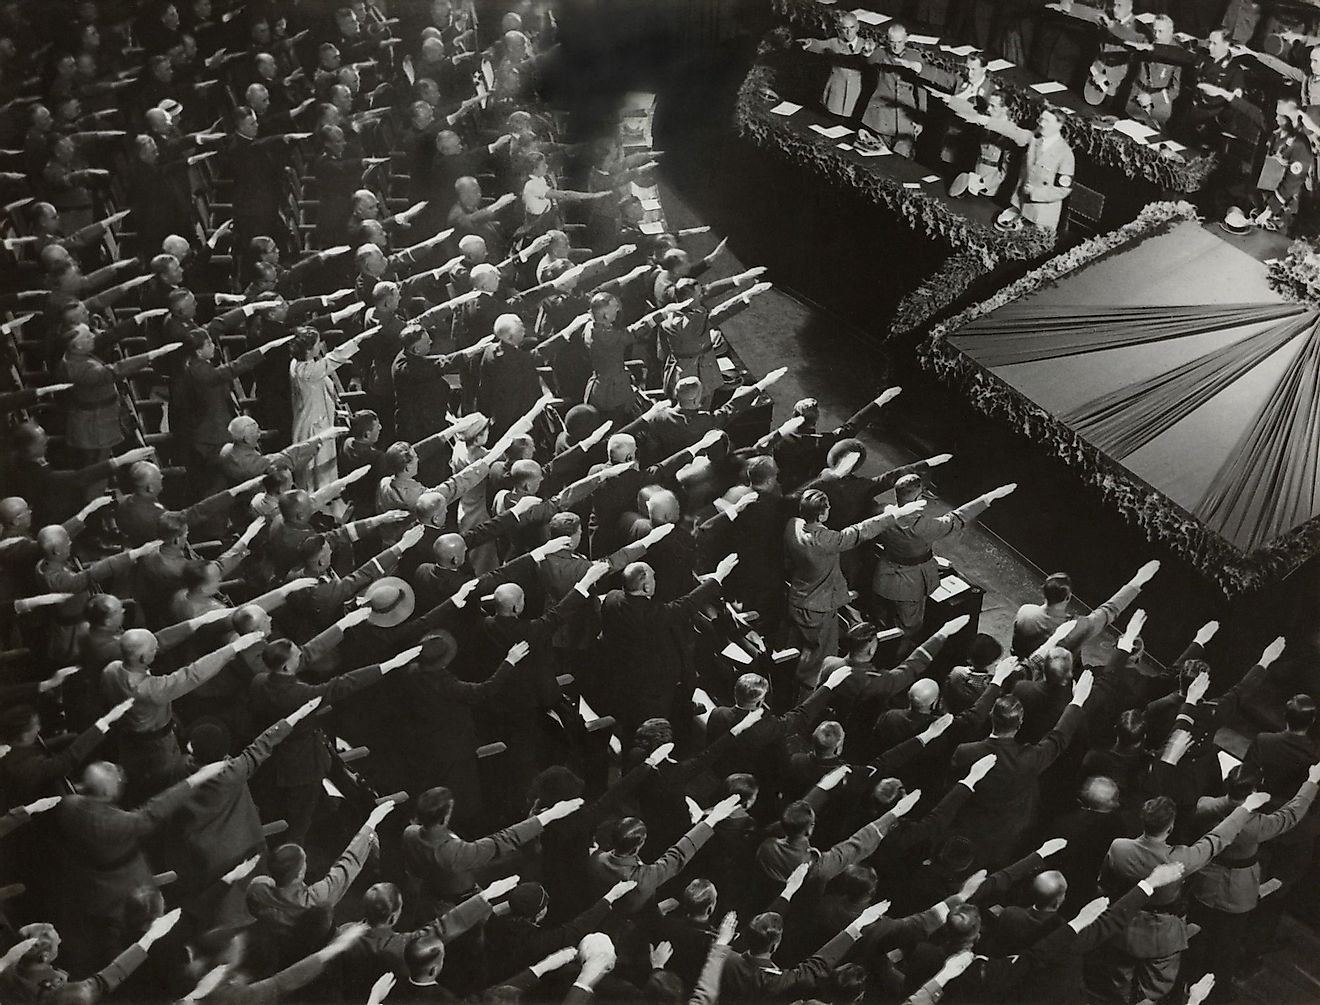 Attendees give Hitler the Nazi salute during the nation anthem, Oct. 9, 1935. They were meeting at the Kroll Opera in Berlin. Editorial credit: Everett Collection / Shutterstock.com